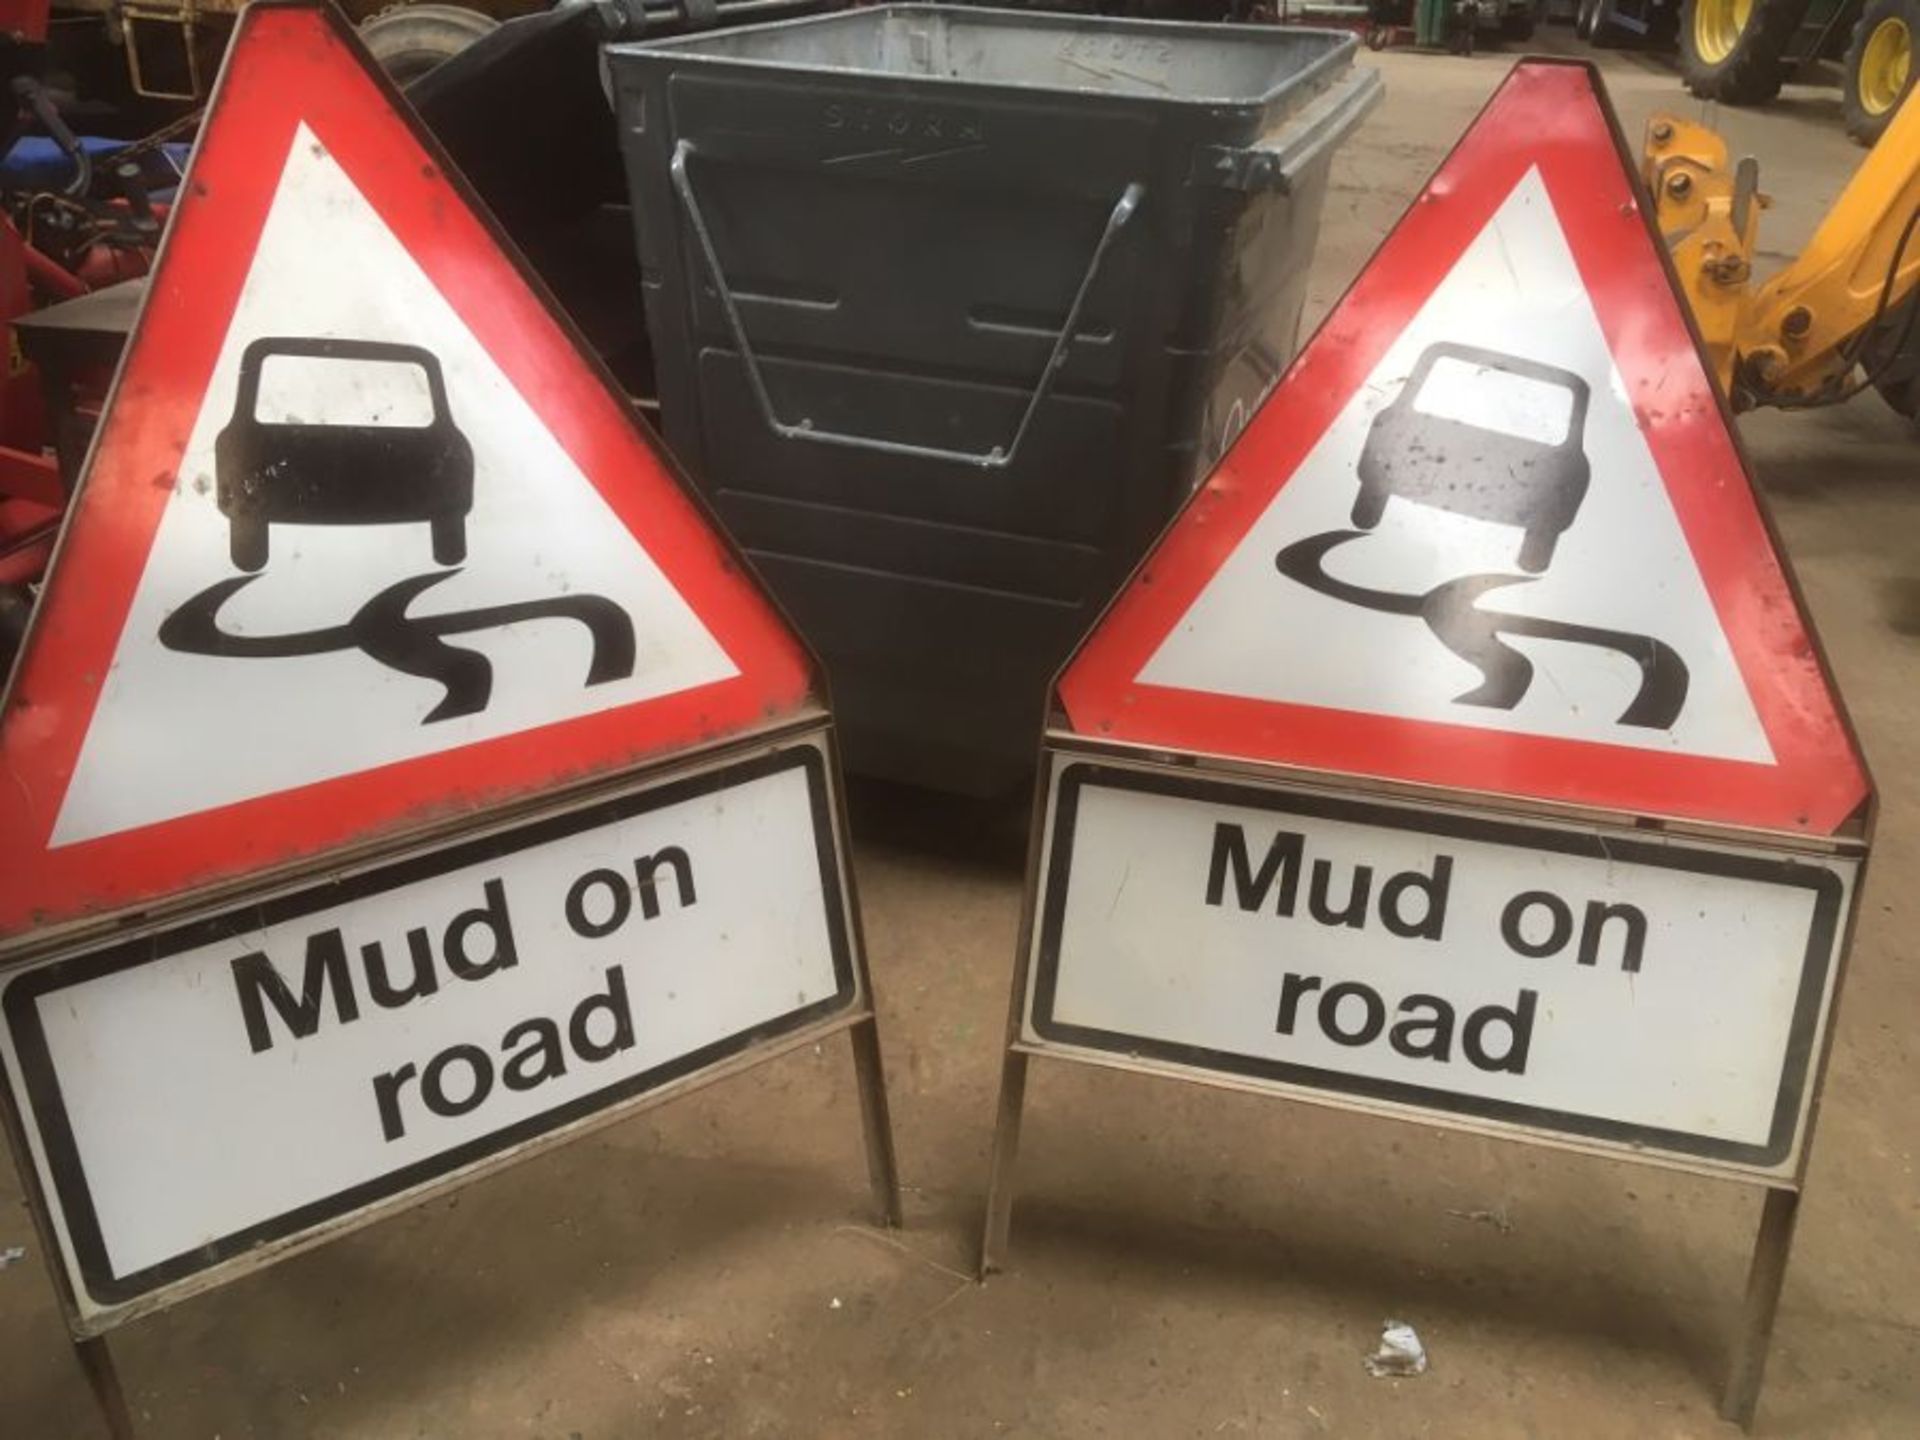 2x Mud on road warning signs